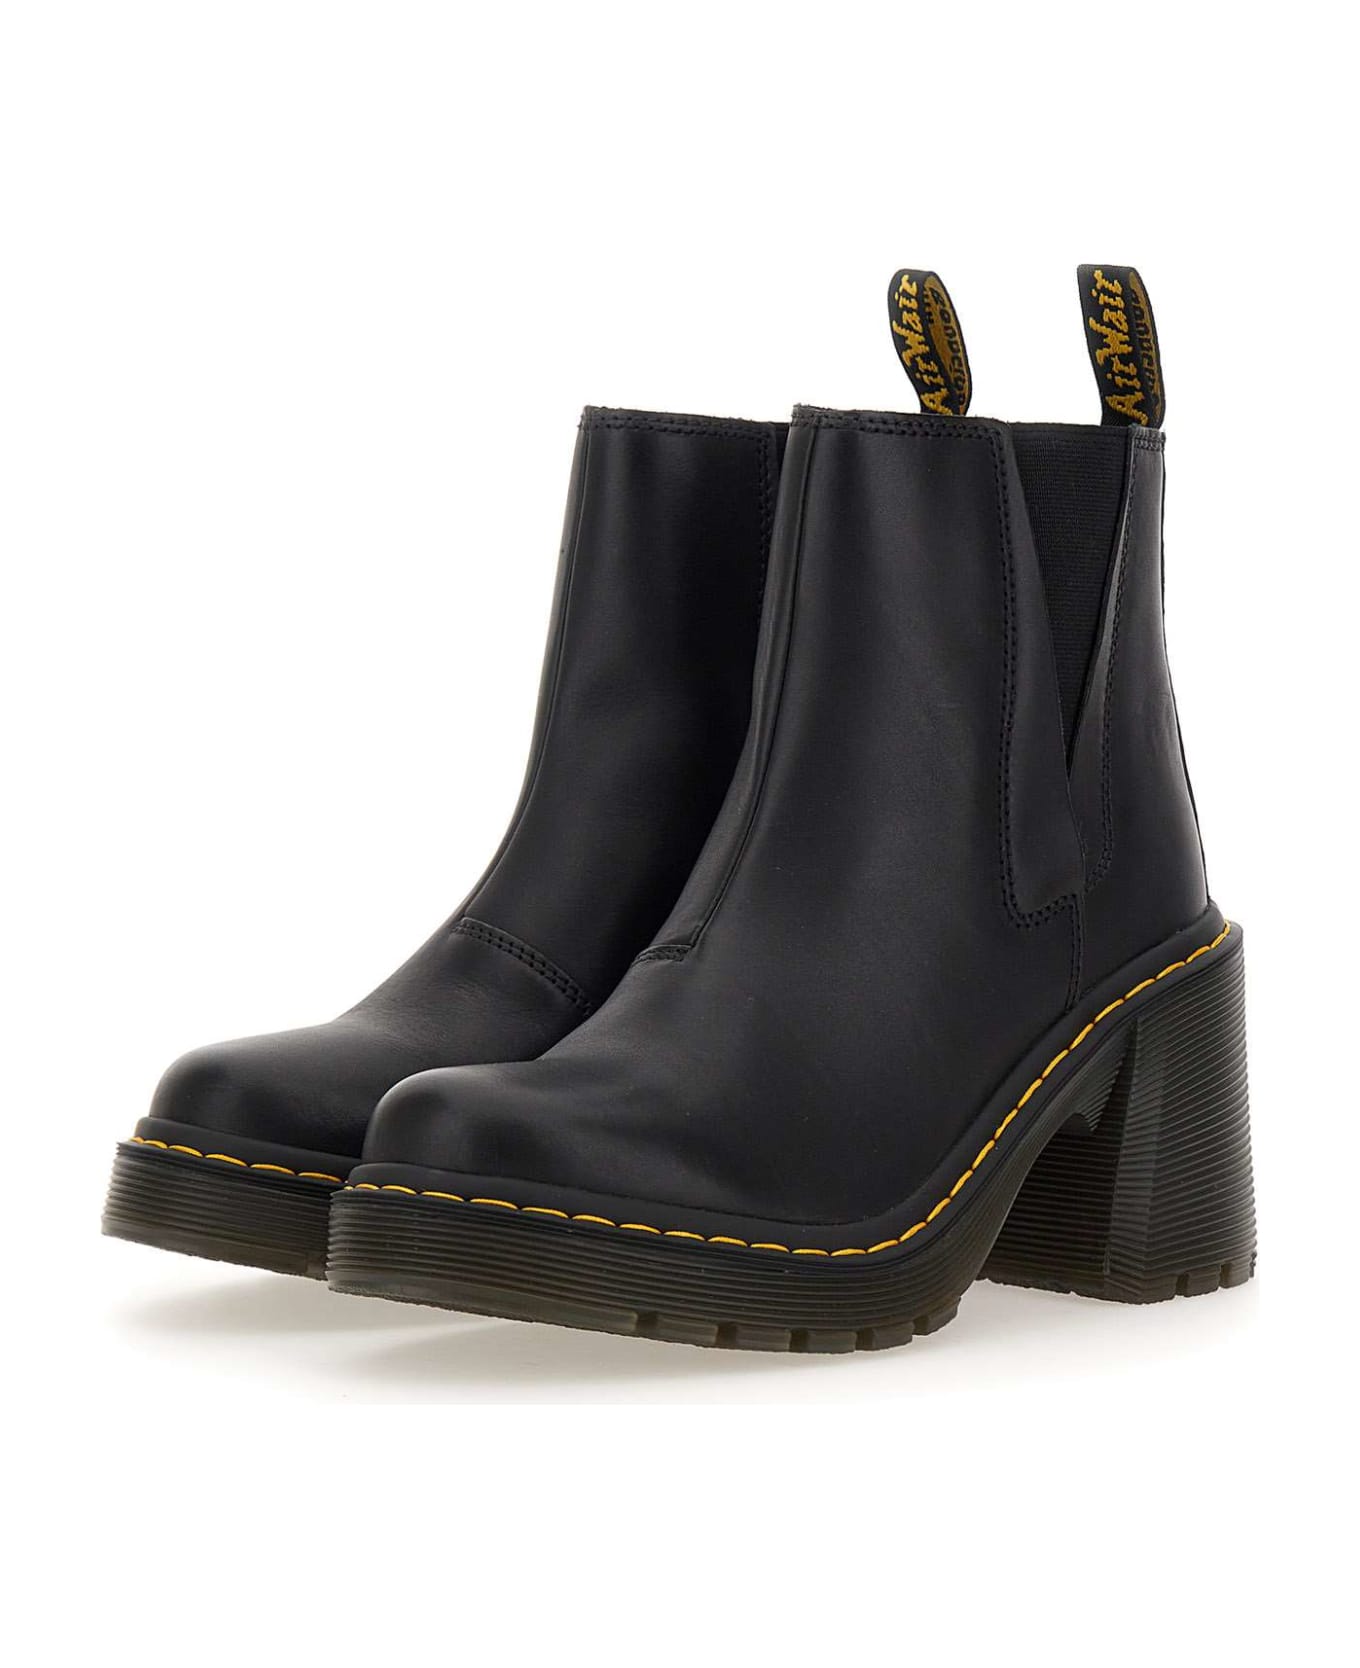 Dr. Martens Spence Leather Ankle Boots - BLACK ブーツ